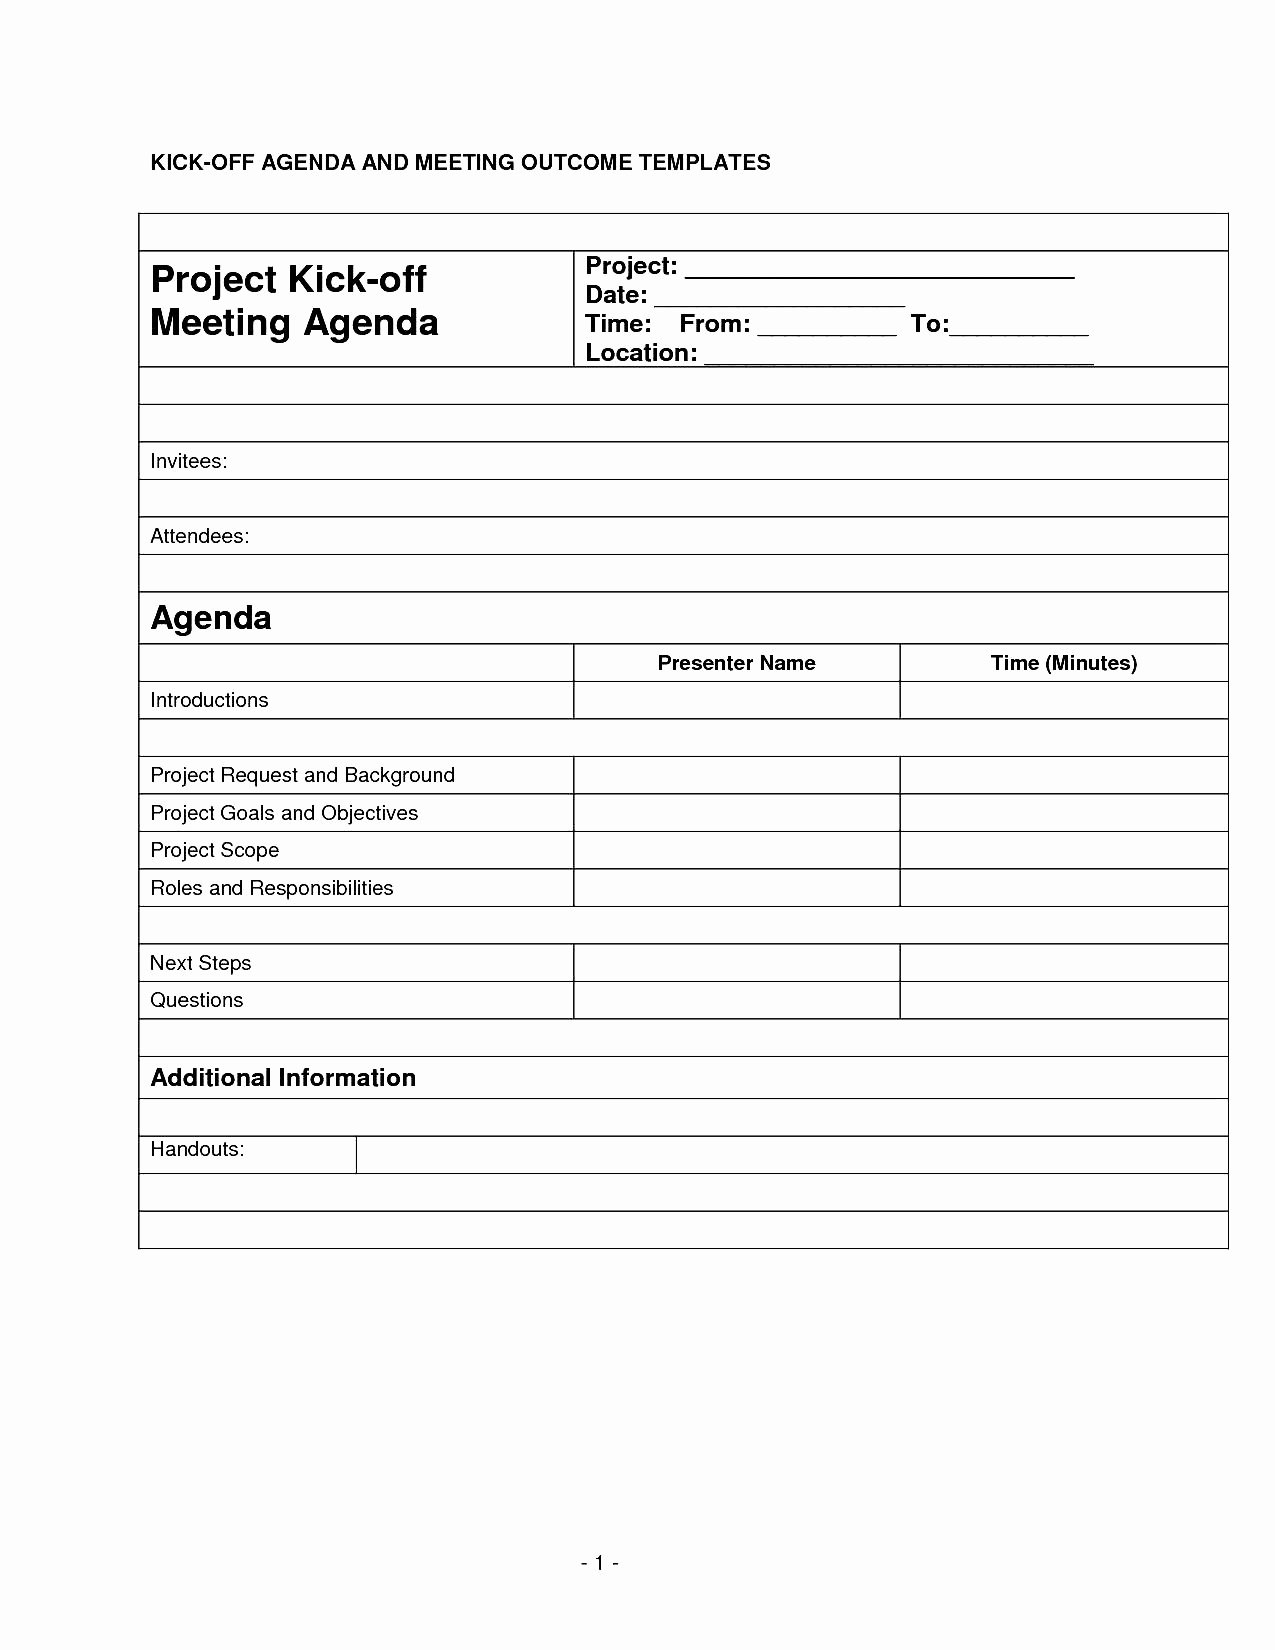 Best Kick F Agenda and Meeting Out E Template Example